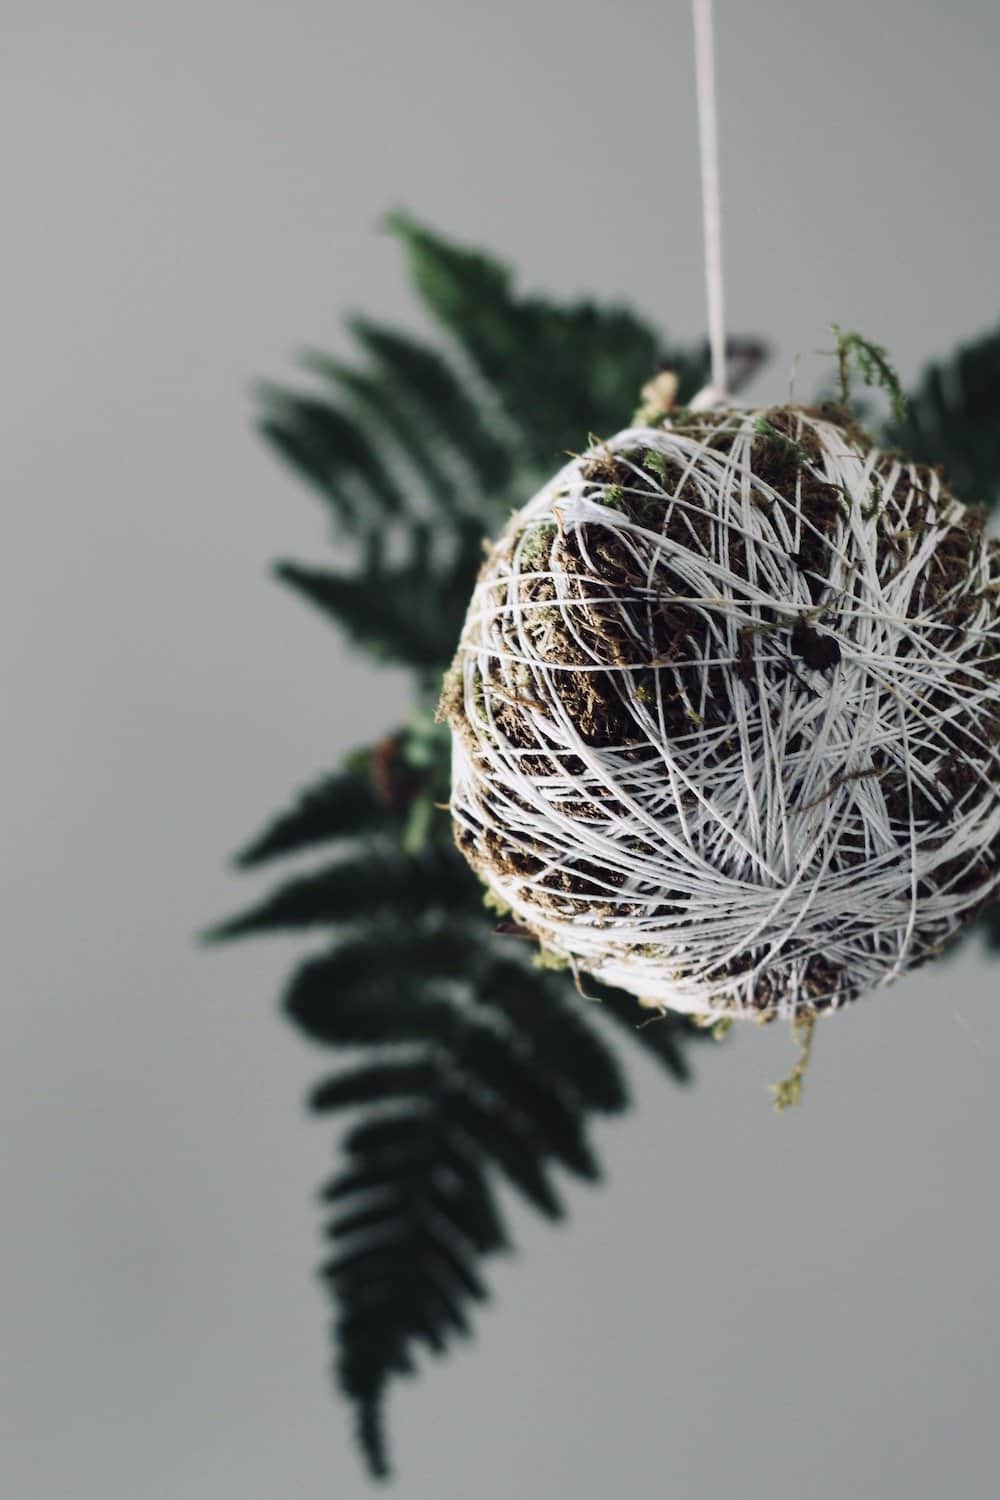 She wraps string around soil and moss to create an amazing hanging string garden! This moss ball is so gorgeous #kokedama #mossball #stringgarden #hanginggarden